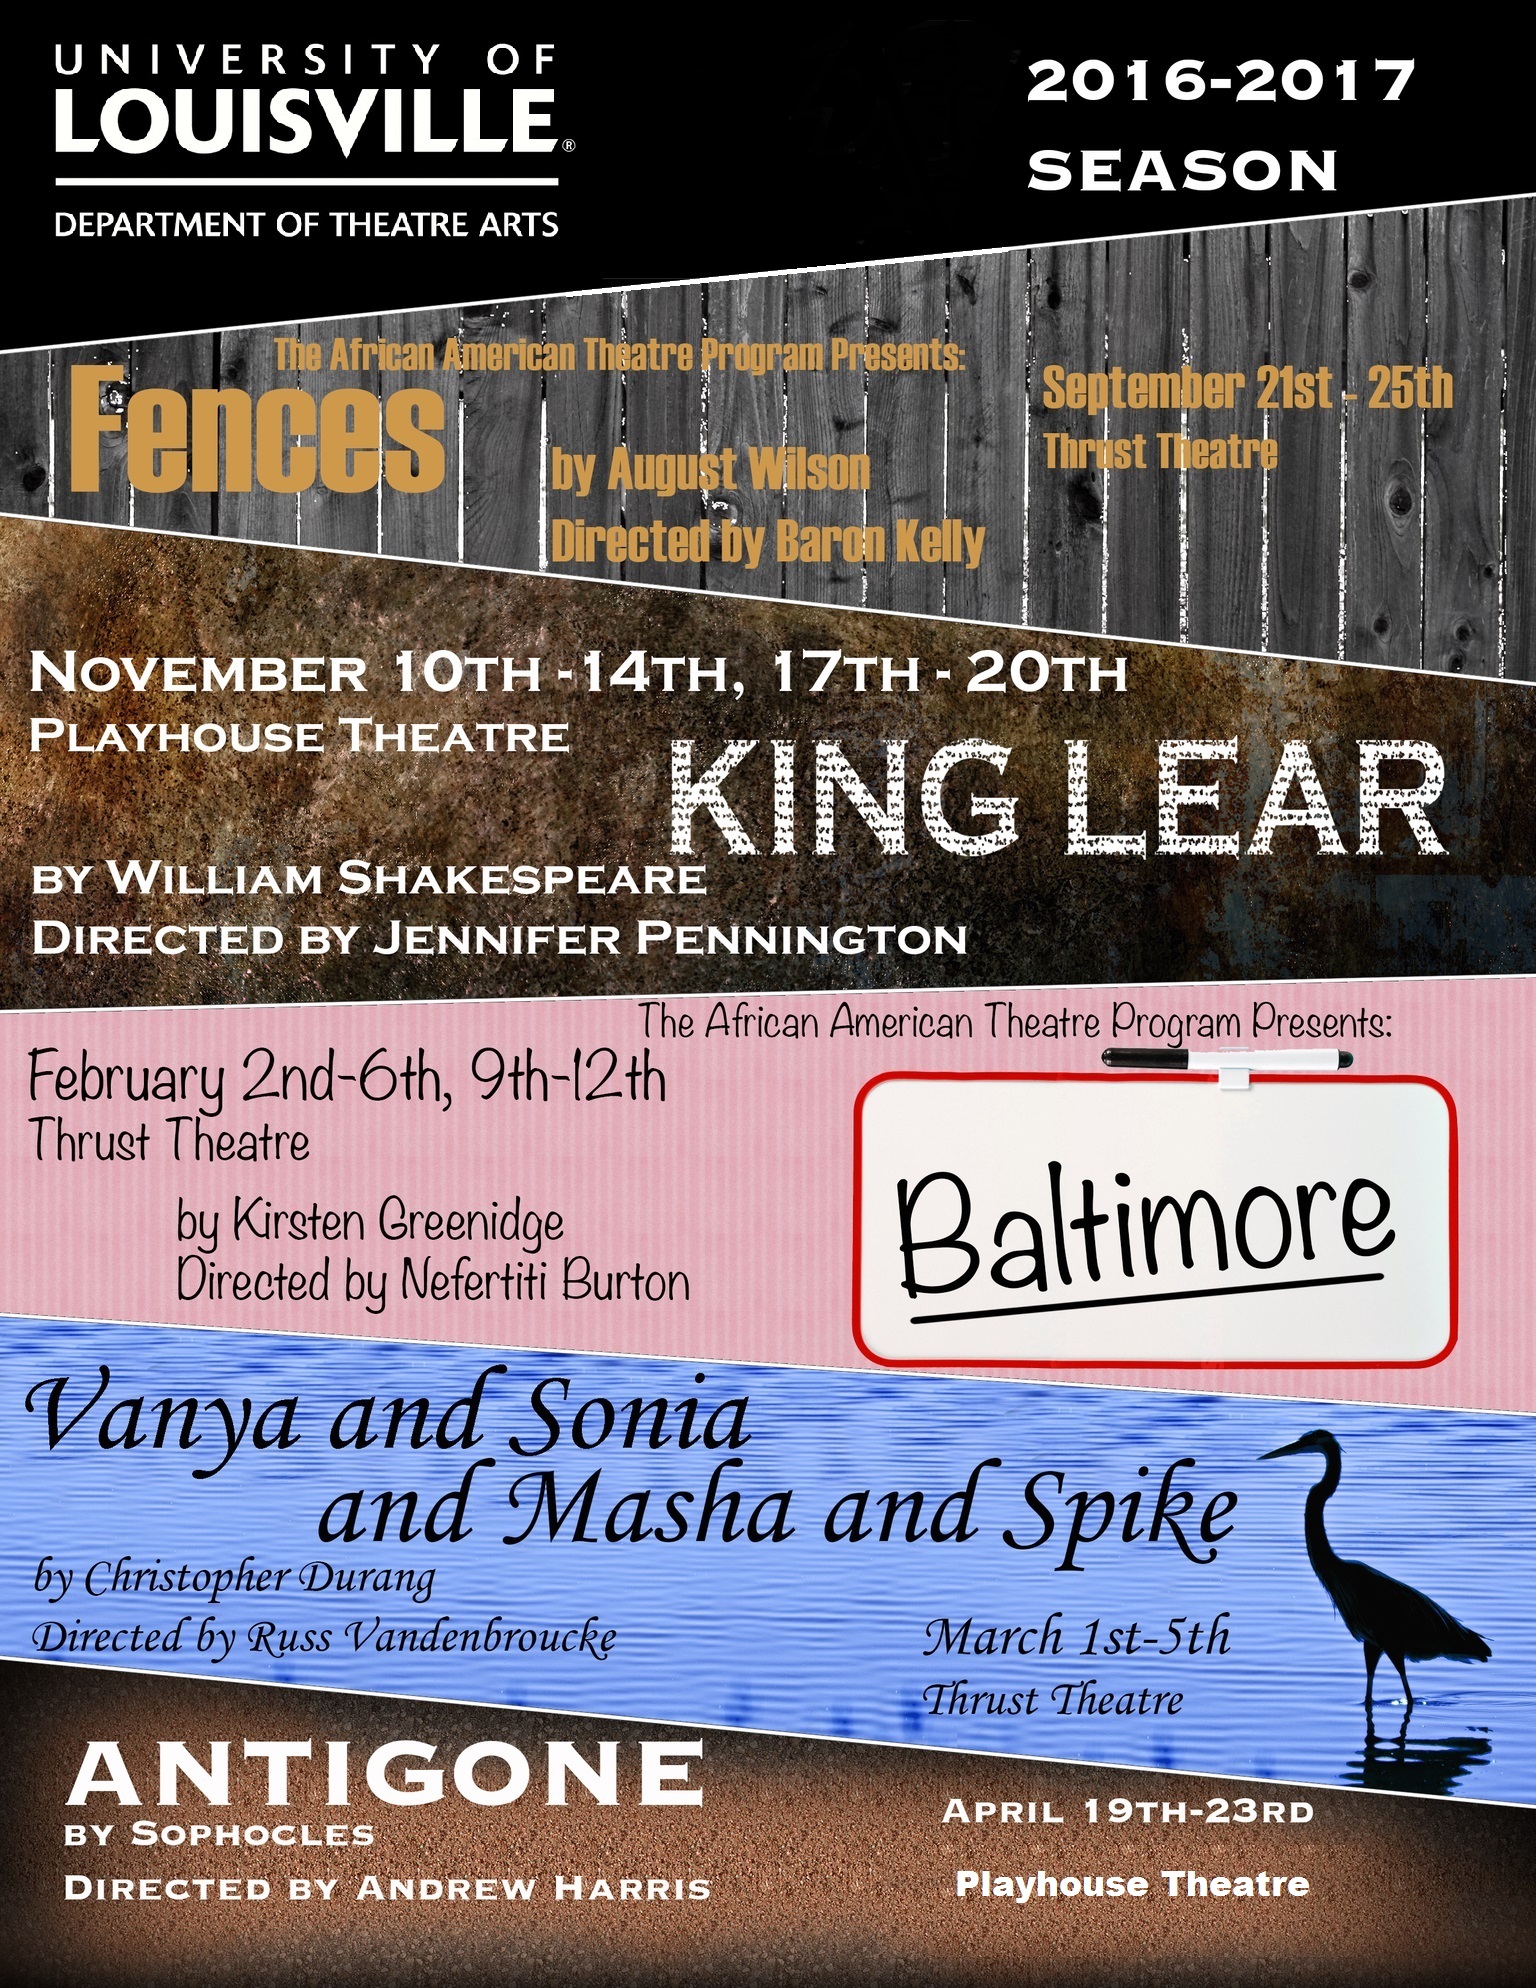 University of Louisville Department of Theatre Arts 2016-27 season, Fences the African American Theatre Program Presents by August Wilson, directed by baron Kelly, September 21-25 Thrust Theatre, King Lear by William Whakespeare, directed by Jennifer Pennington, November 10-14 and 17-20, Playhouse Theatre, Baltimore, the African American Theatre Program presents, by Kirsten Greenidge, directed by Nefertiti Burton, February 2-6 and 9-12, Thrust Teatre, Vanya and Sonia and Marsha and Spike, by Christopher Durang, directed by Russ Vandenbroucke, March 1-5, Thrust Theatre, Antigone by Sophochles, directed by Andrew Harris, April 19-23 Playhouse Theatre